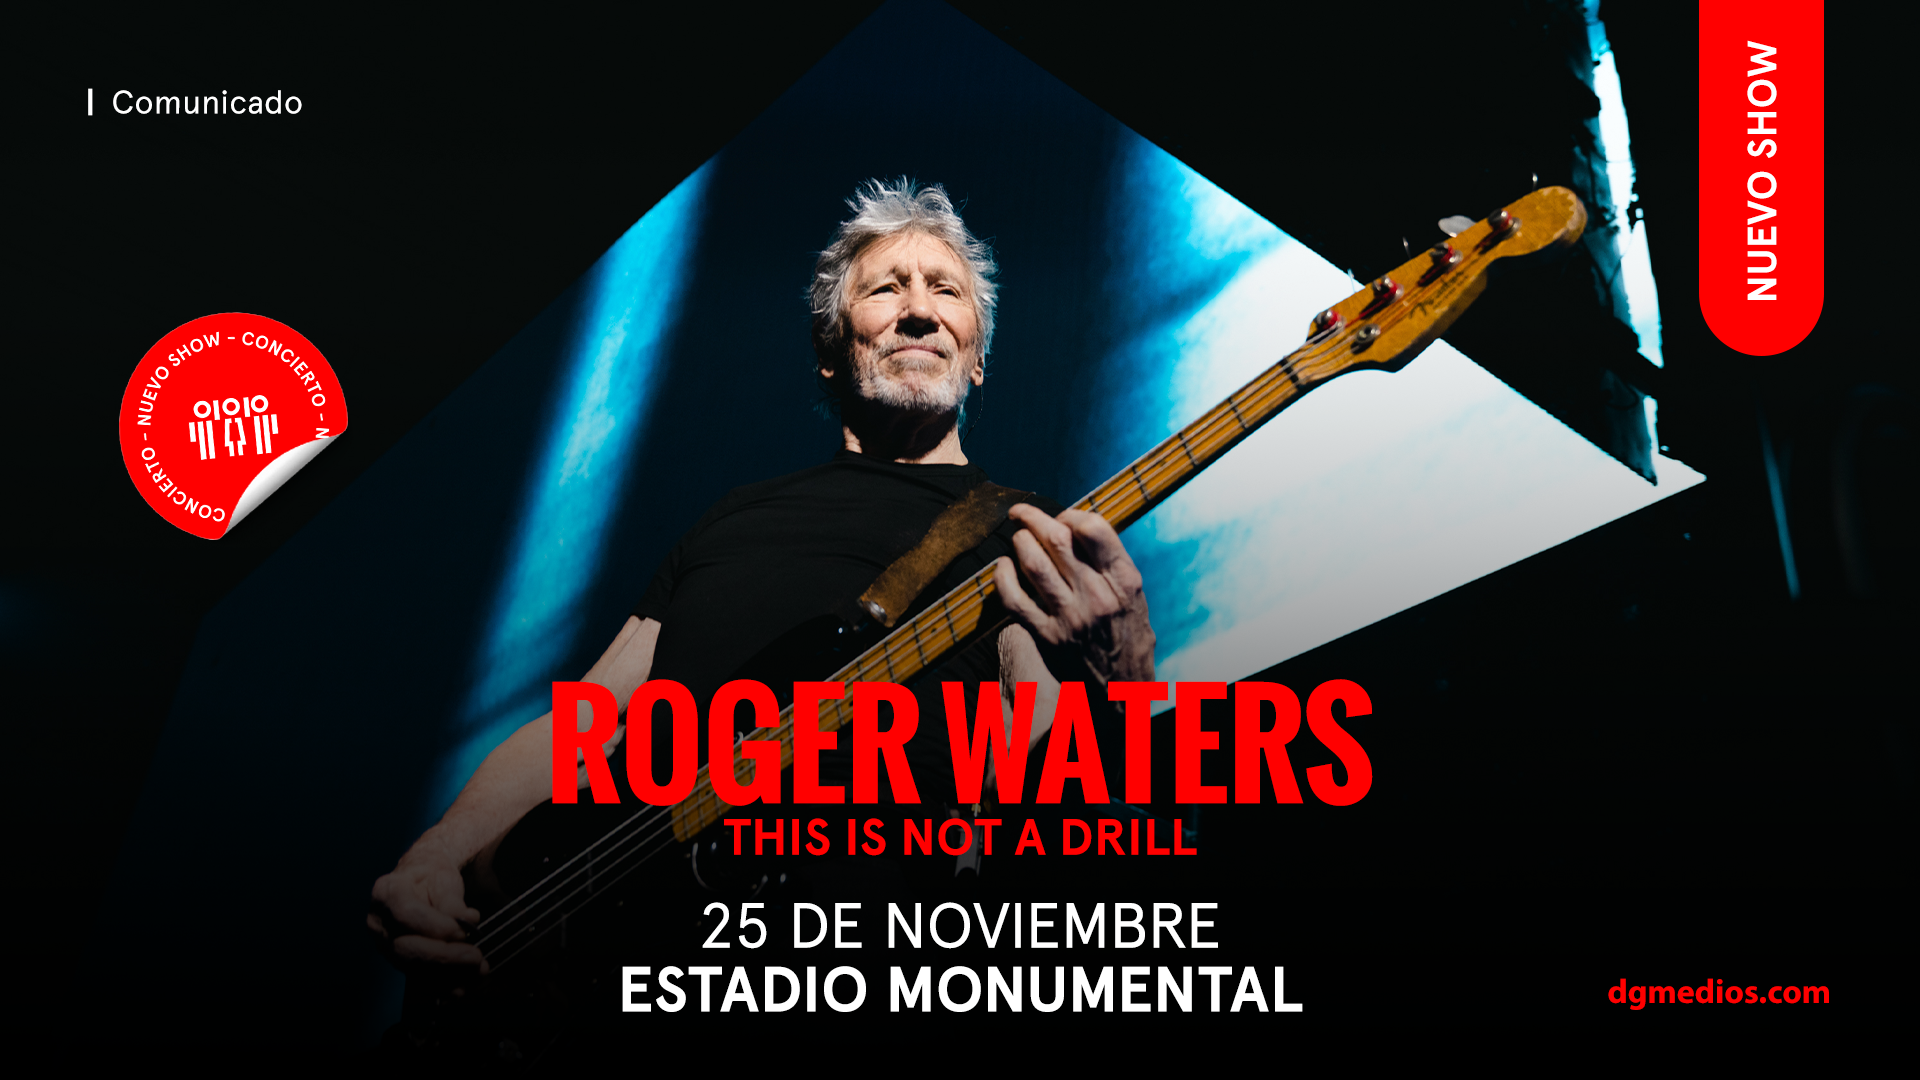 Cartelera Roger Waters regresa a Chile con su tour “THIS IS NOT A